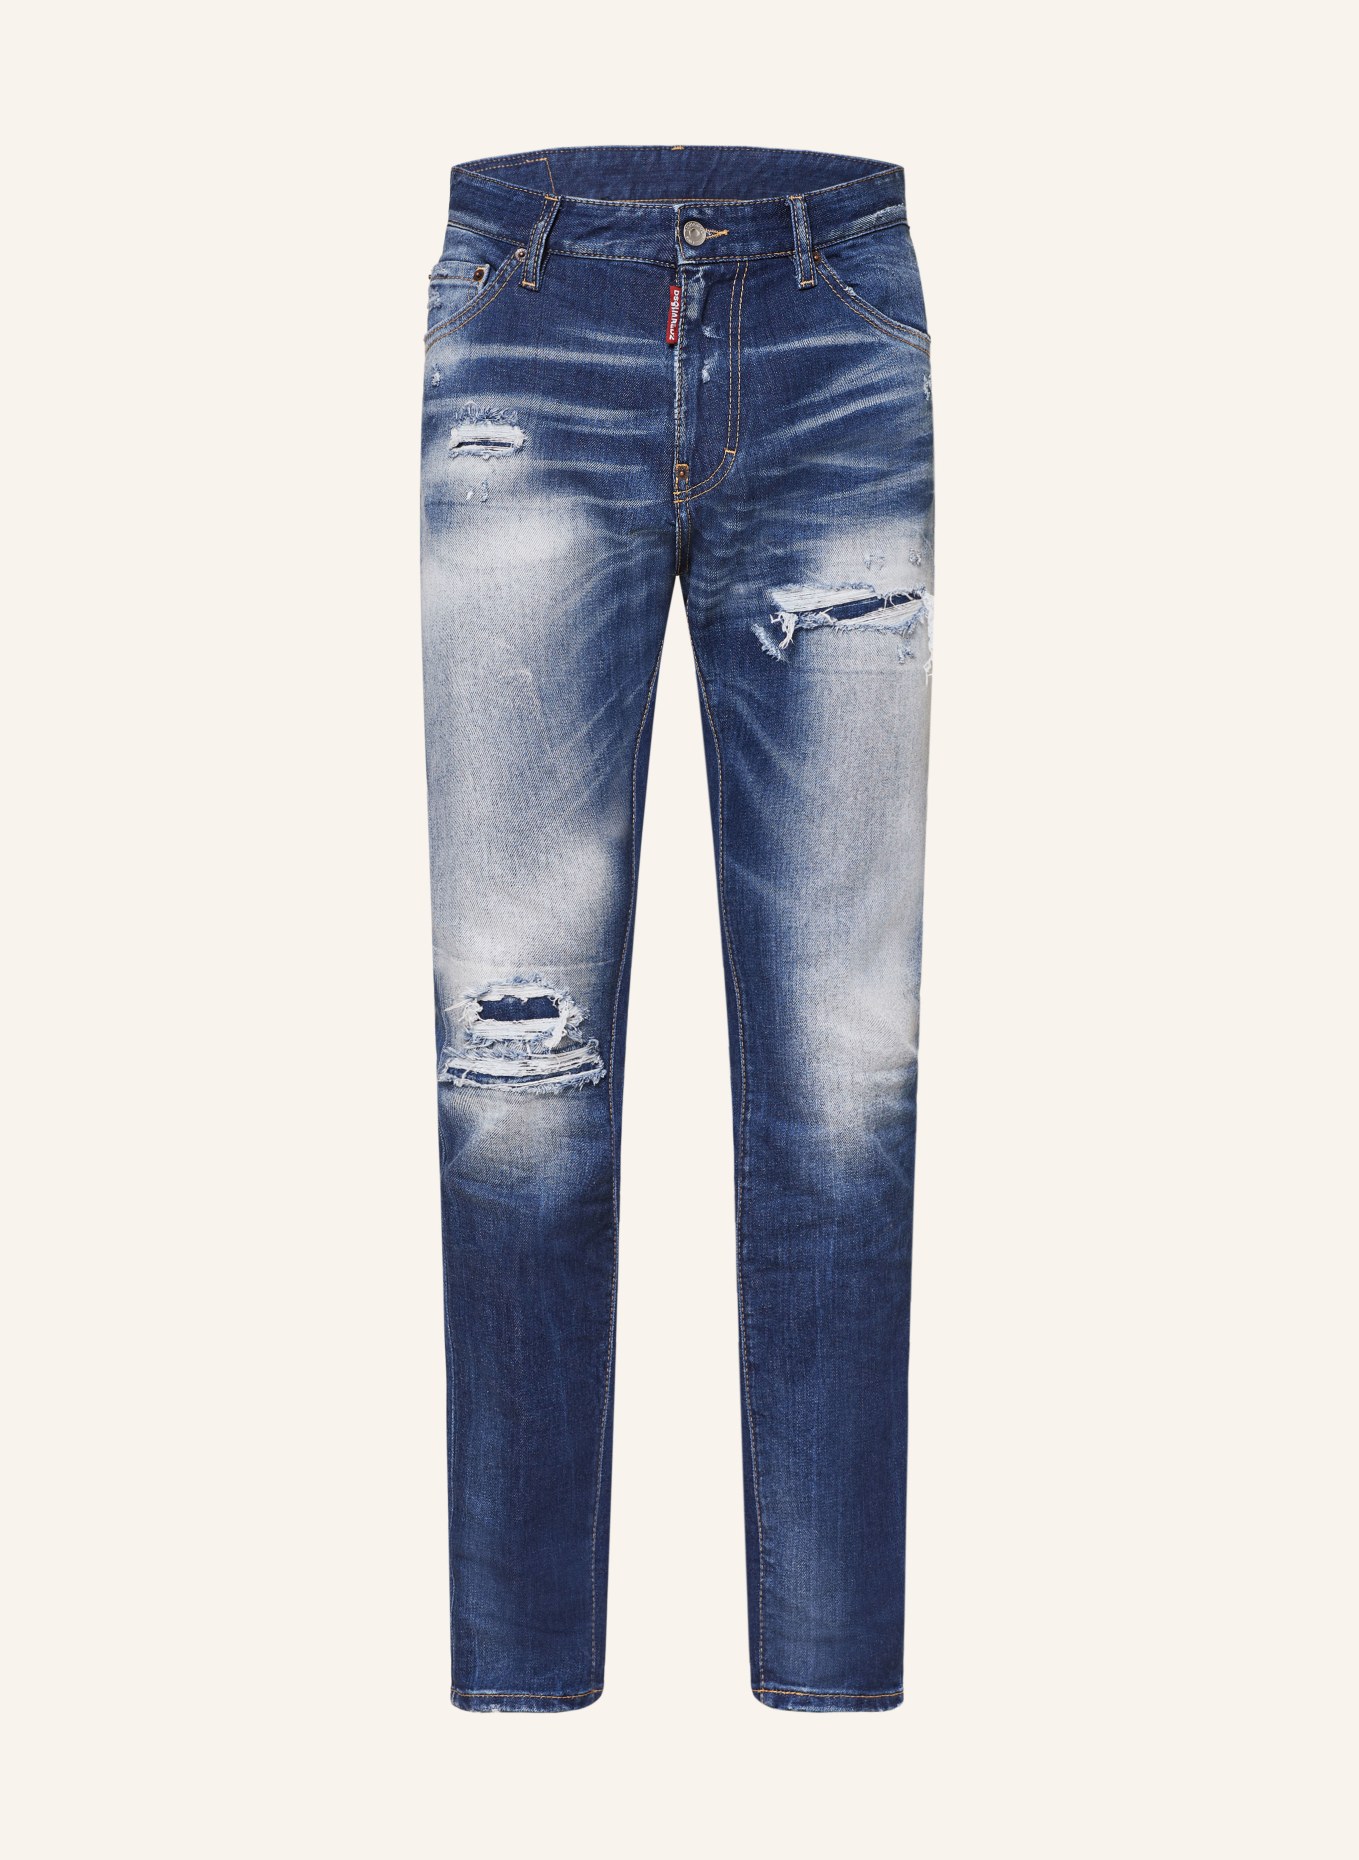 DSQUARED2 Destroyed Jeans COOL GUY Extra Slim Fit, Farbe: 470 BLUE NAVY (Bild 1)